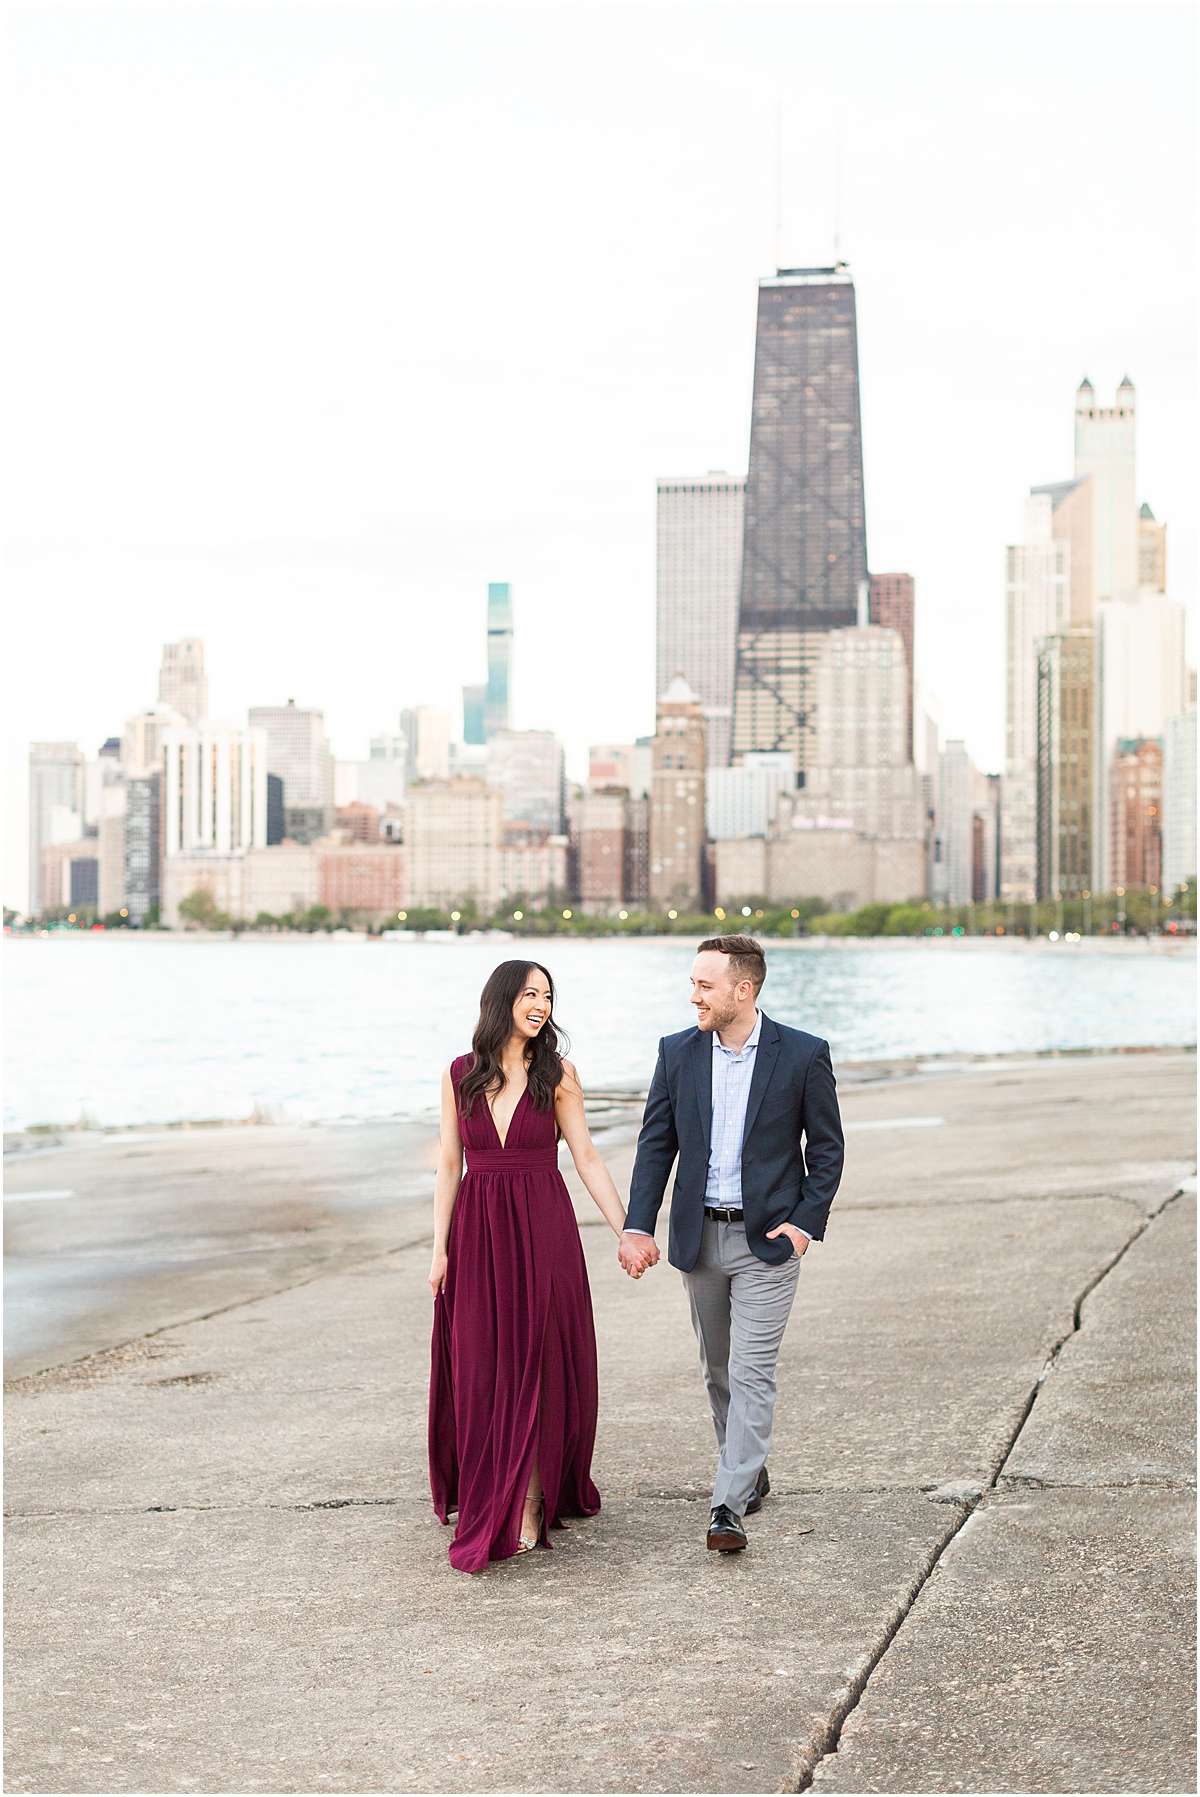 12 Best Chicago Engagement Session Locations - North Ave. beach 